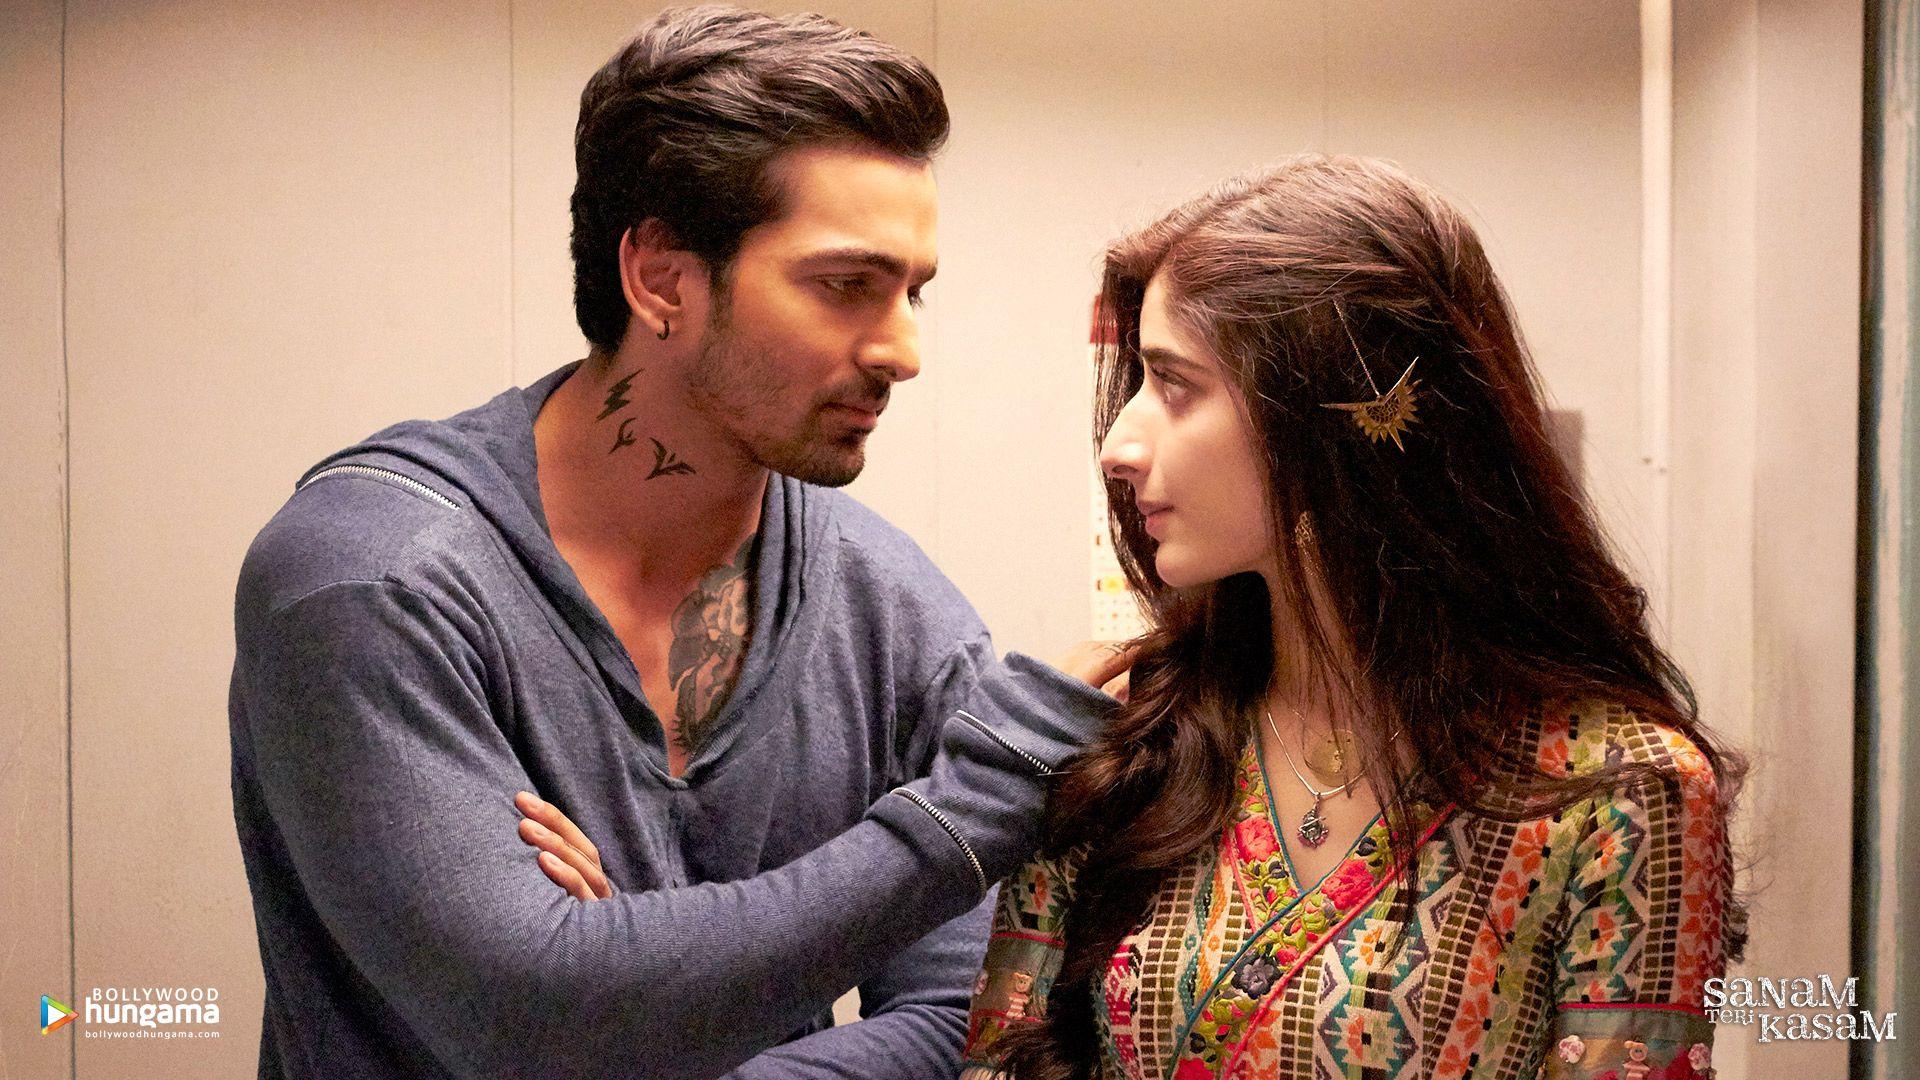 Sanam Teri Kasam review This cliched love story doesnt do justice to  Mawra Hocane Harshvardhan Ranes potential as actors  News18